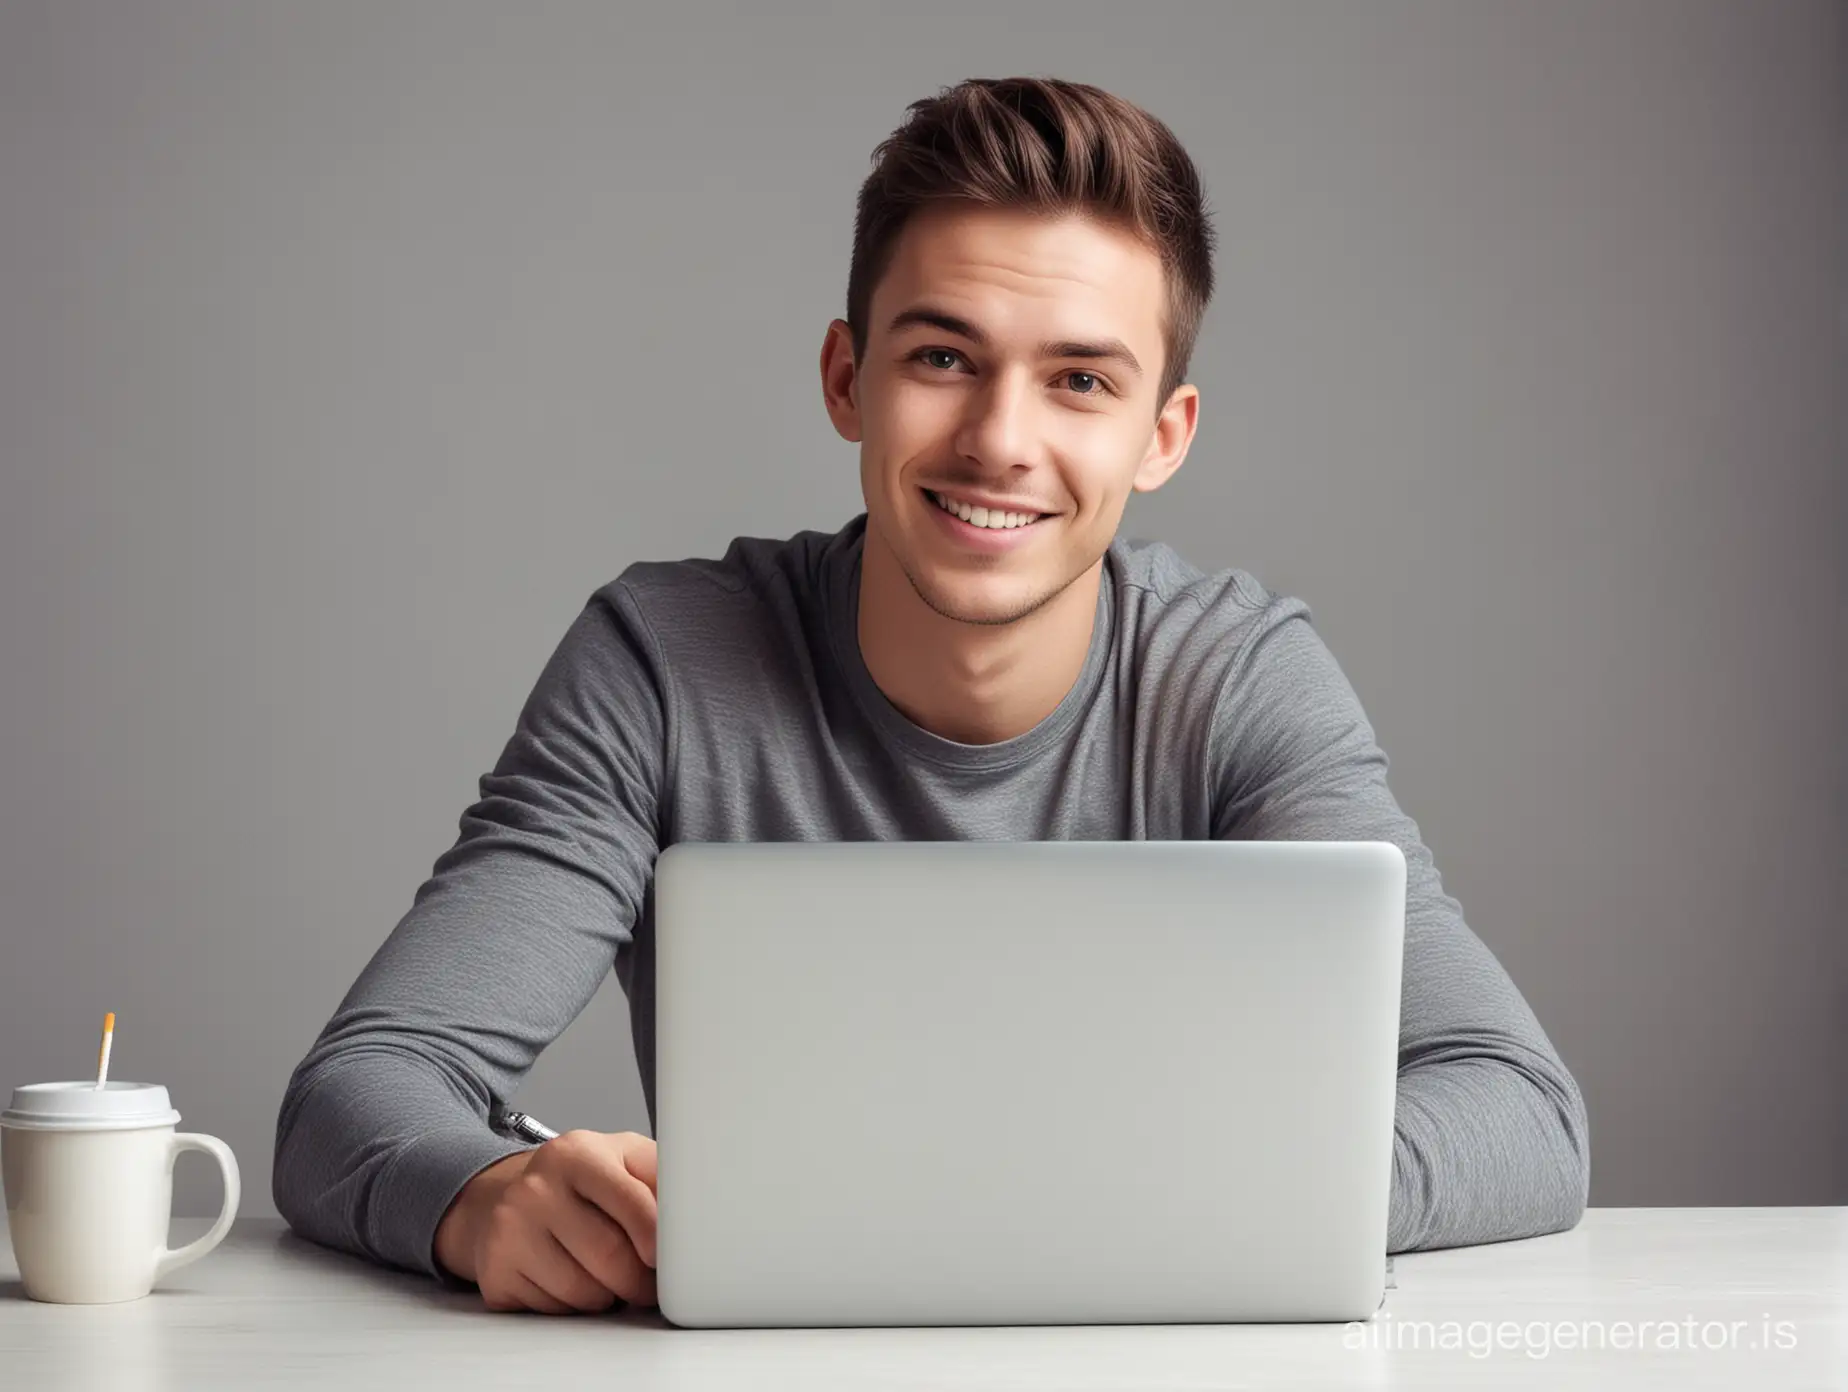 A charming young man who creates online advertisements for his clients